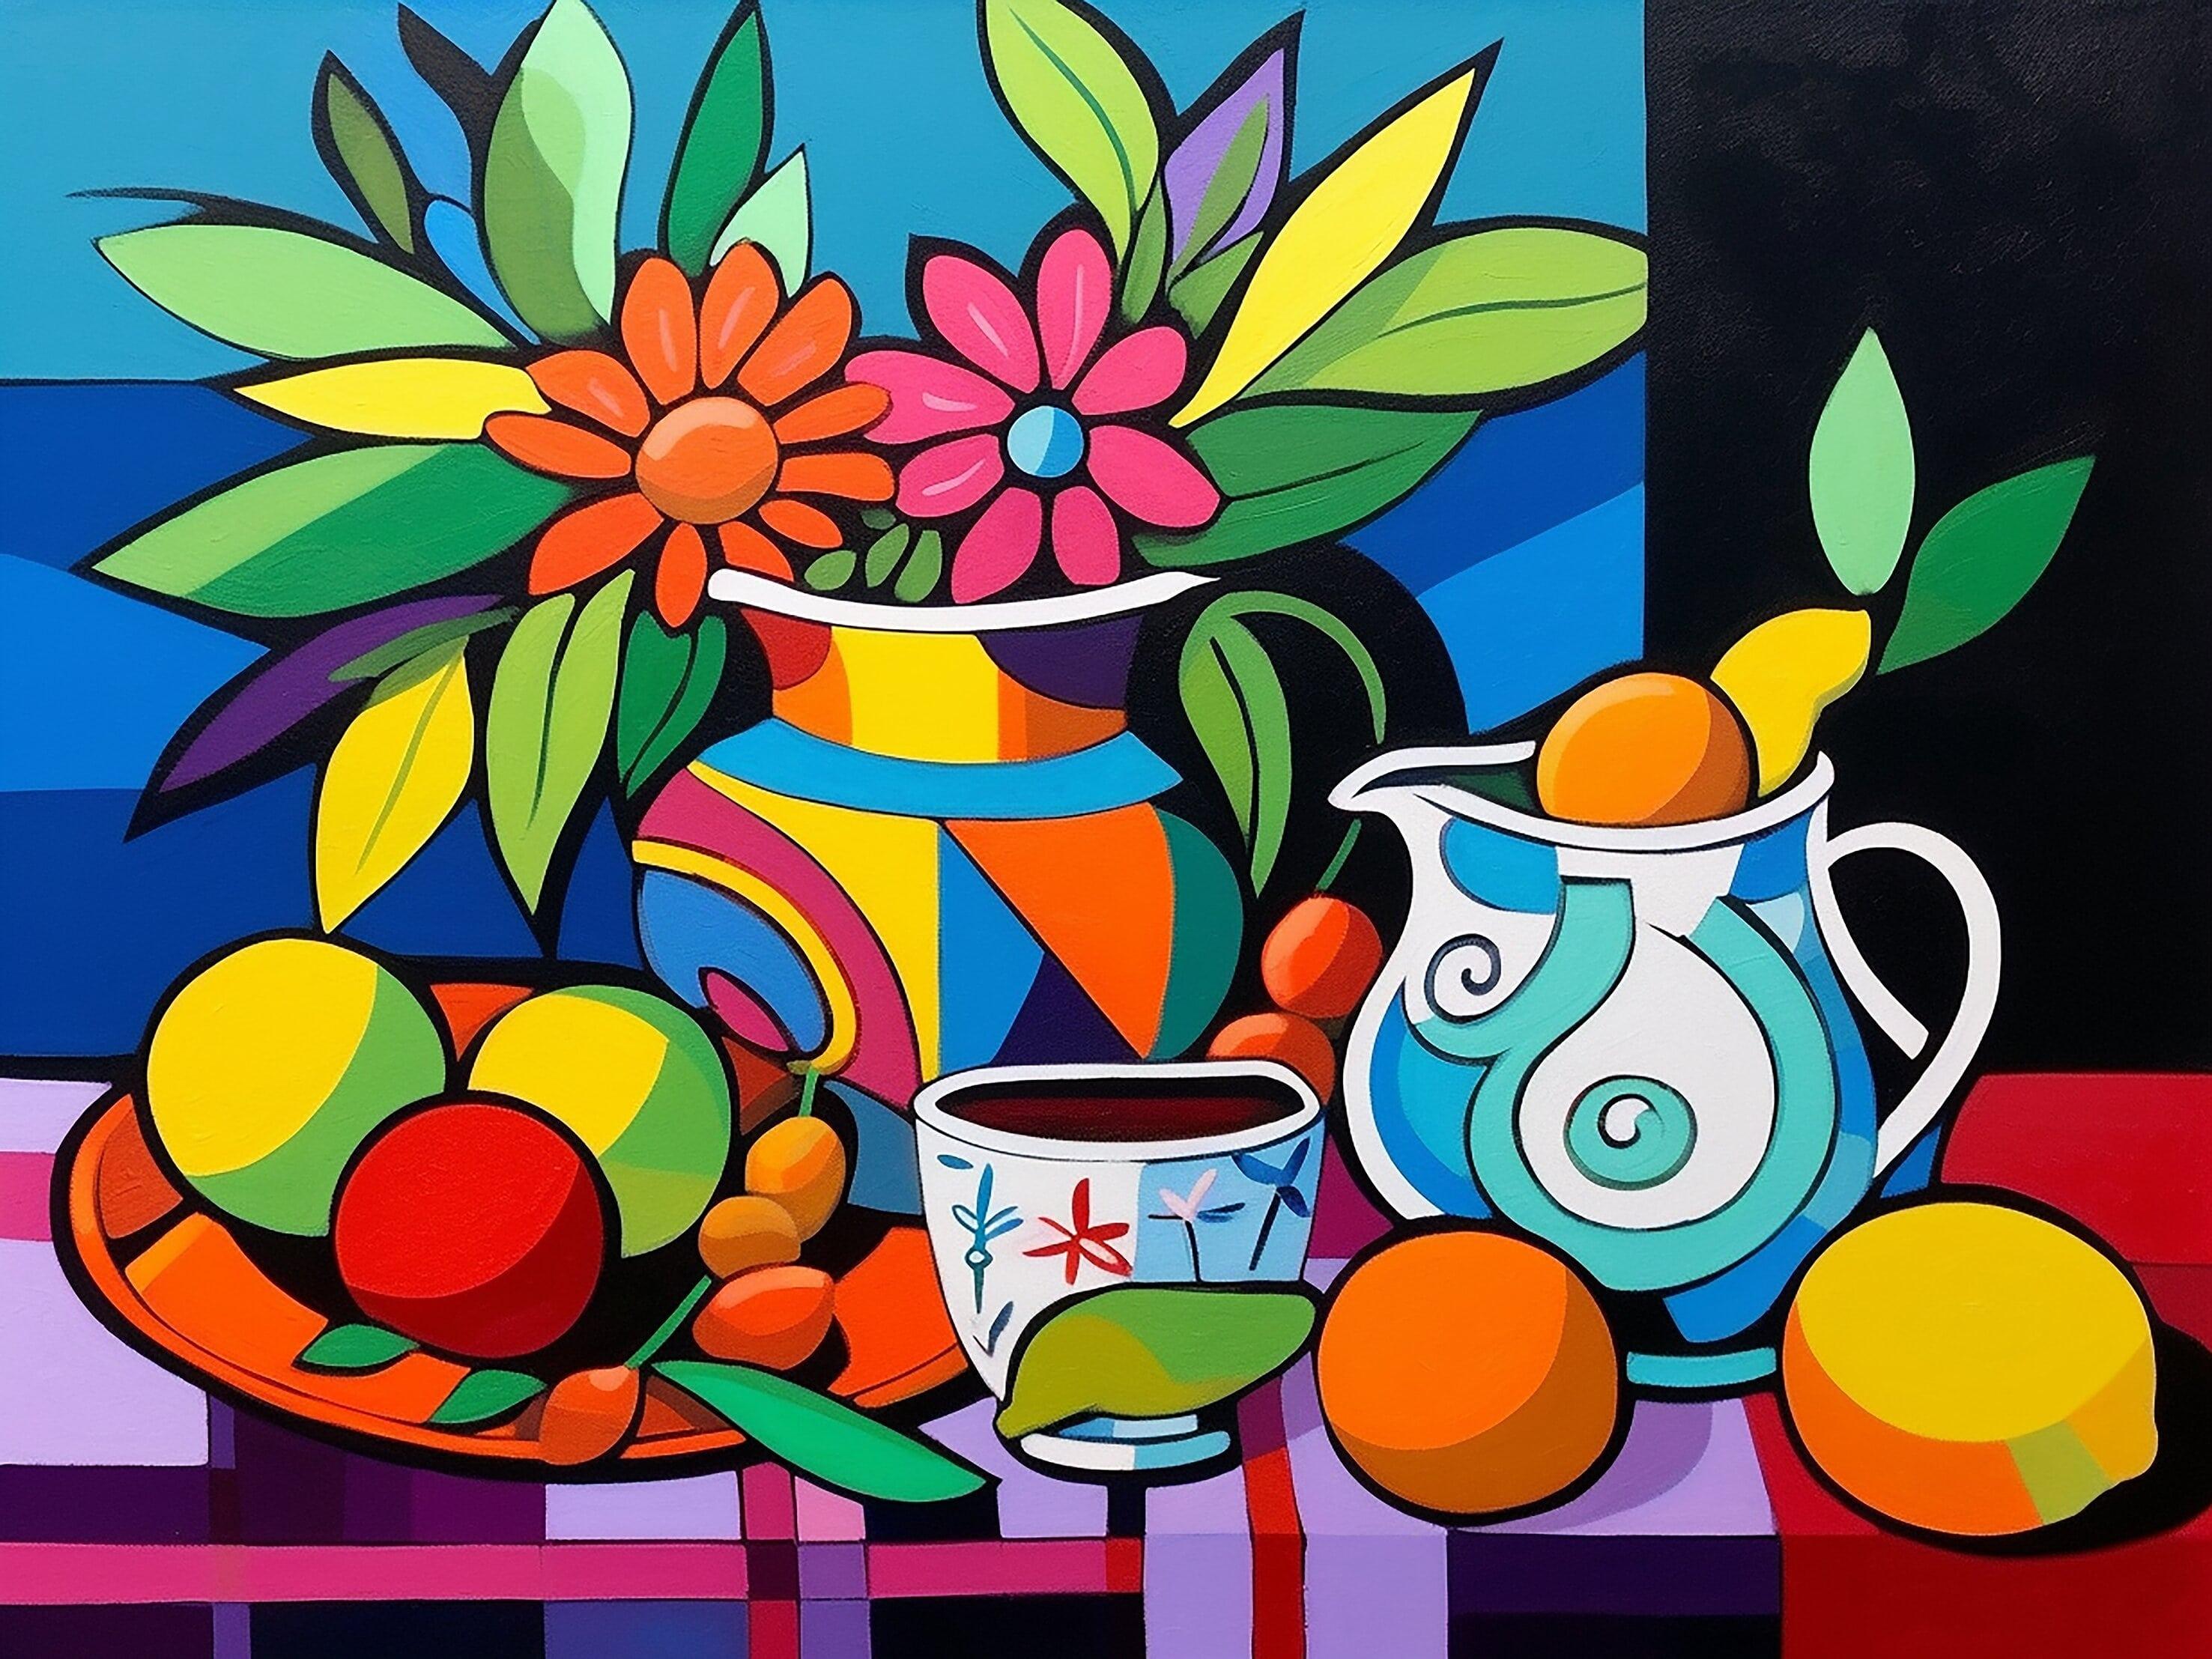 The original painting "Vibrant still life" was created with colourful acrylic paints on a standard canvas. Ideal for your home, living room, dining room, bedroom or office.    The size of this particular artwork:    Height : 23.62 inches (60 cm) 